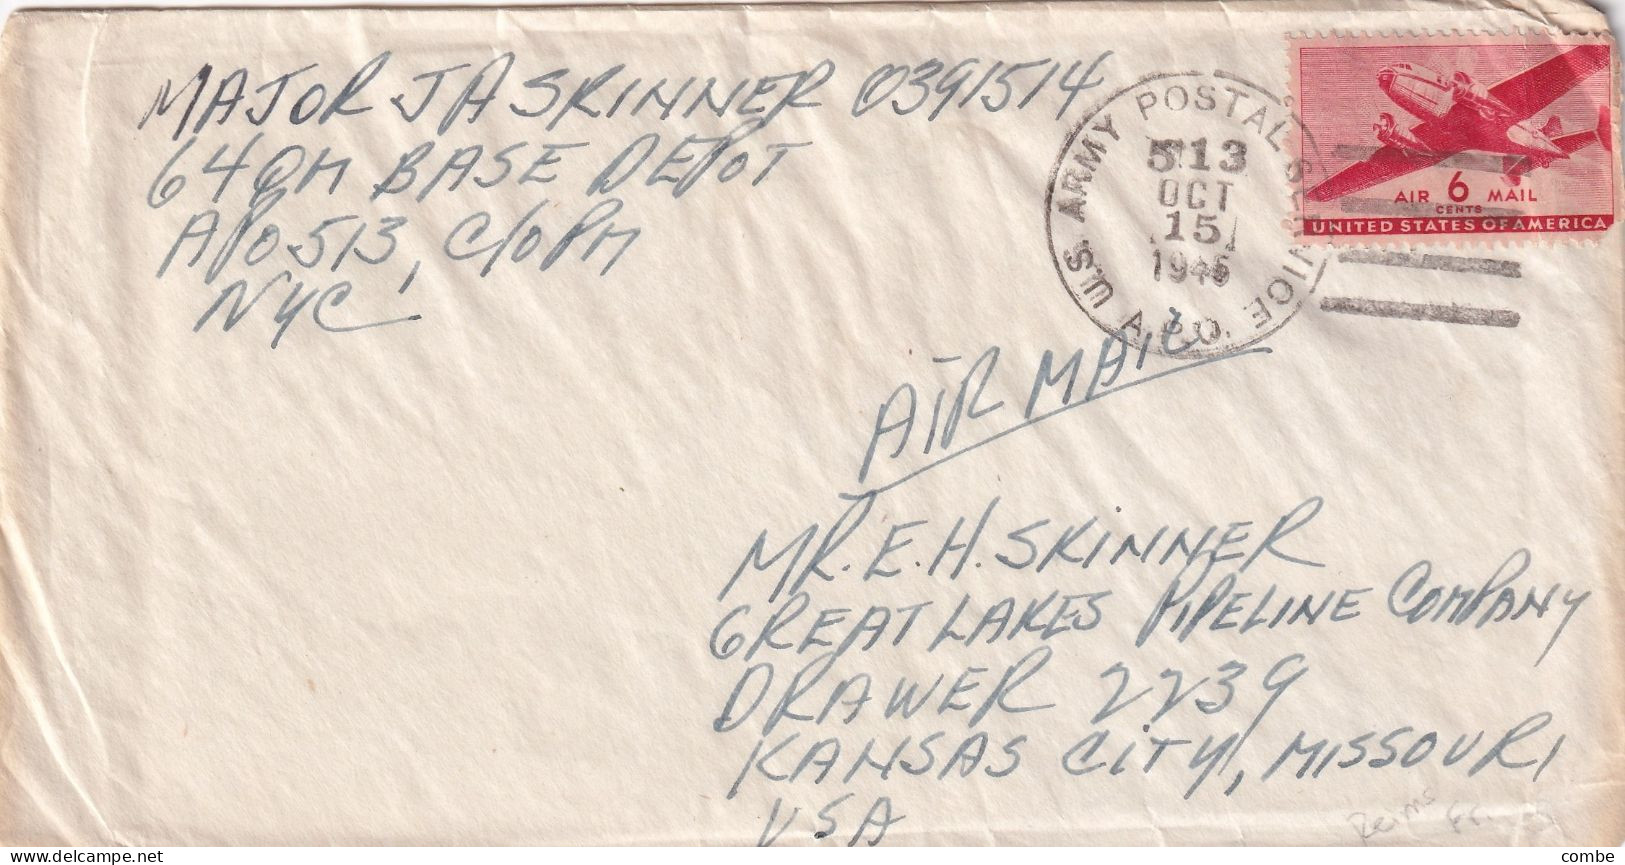 COVER USA. 15 OCT 1945. APO 513. REIMS. FRANCE. TO KANSAS CITY - Covers & Documents